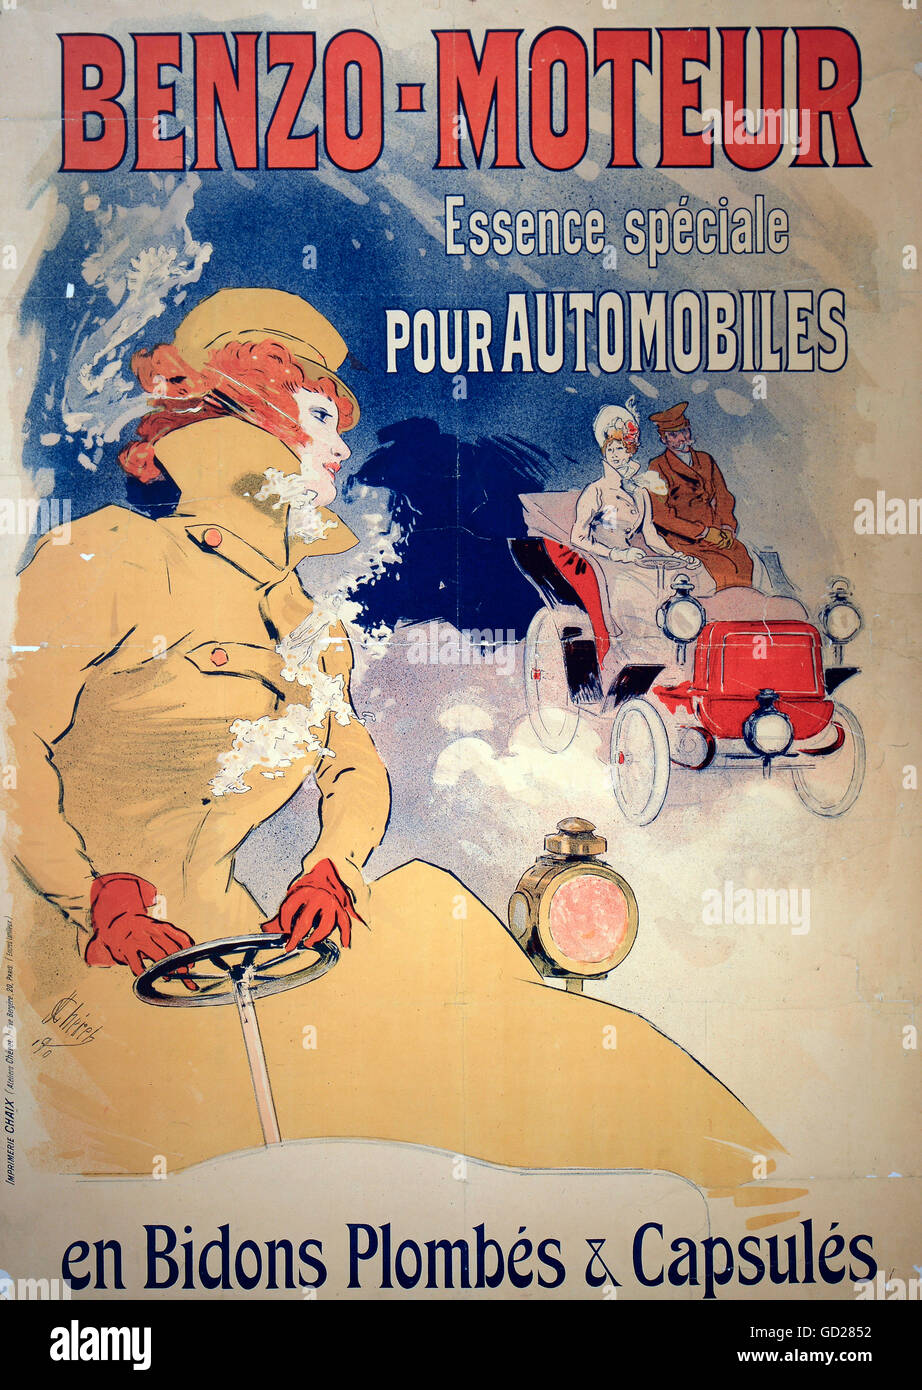 posters, advertising poster the fuel 'Benzo Moteur', colour lithograph, by Jules Cheret (1836 - 1932), Paris, 1890 123 x 86 cm, Neue Sammlung (The New Collection), Munich, Additional-Rights-Clearences-Not Available Stock Photo